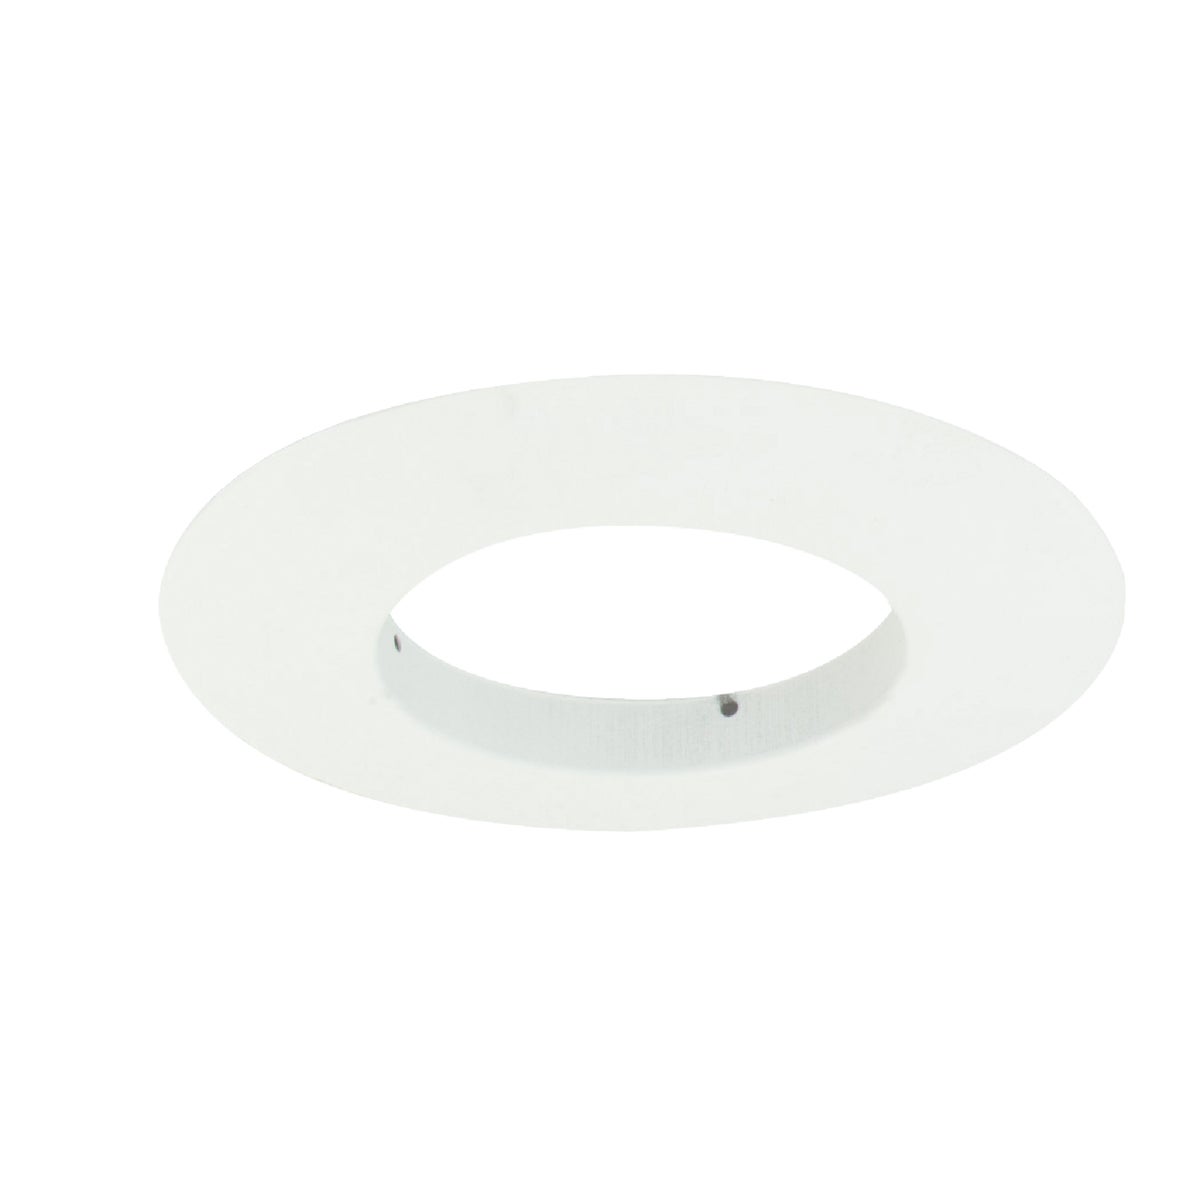 Item 557382, Open trim for use with recessed fixtures. 6 inch inside diameter.